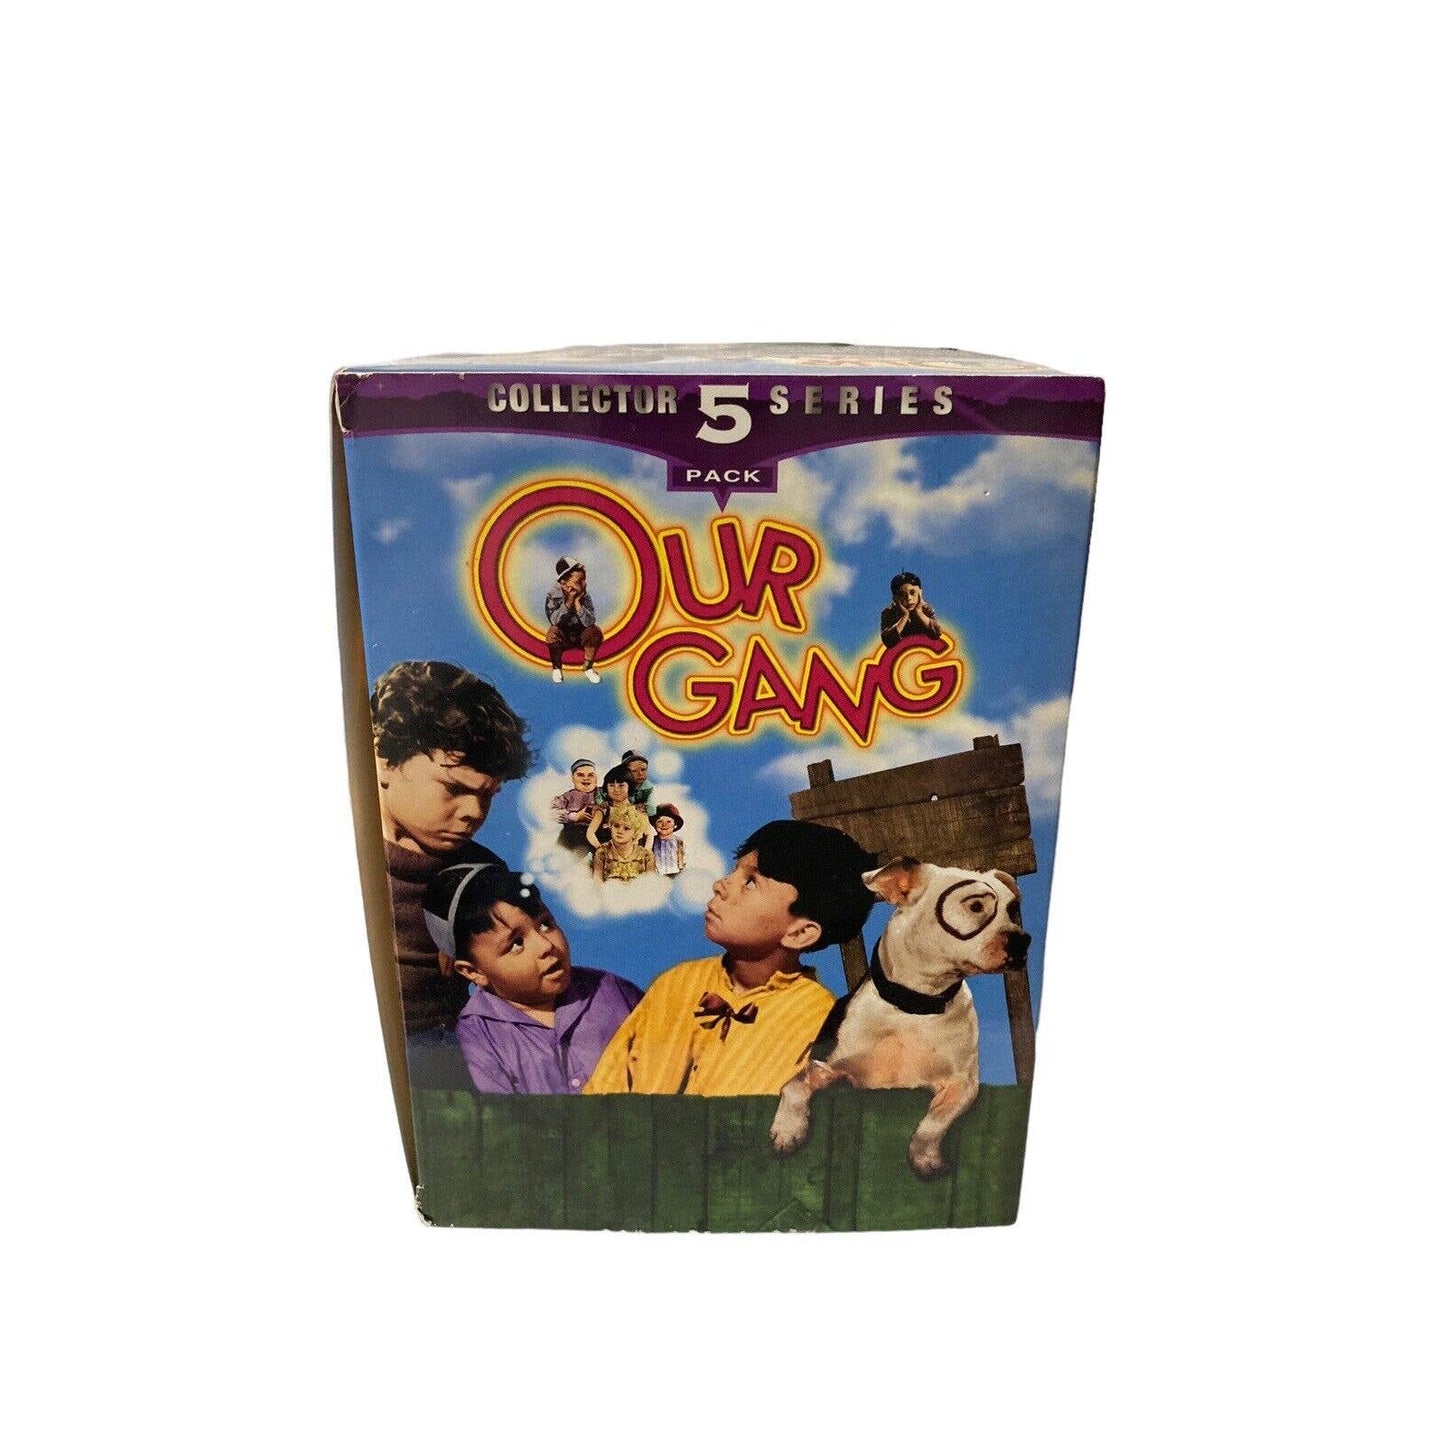 Our Gang - 5 Pack (VHS, 2002, 5-Tape Set) Vintage The Little Rascals